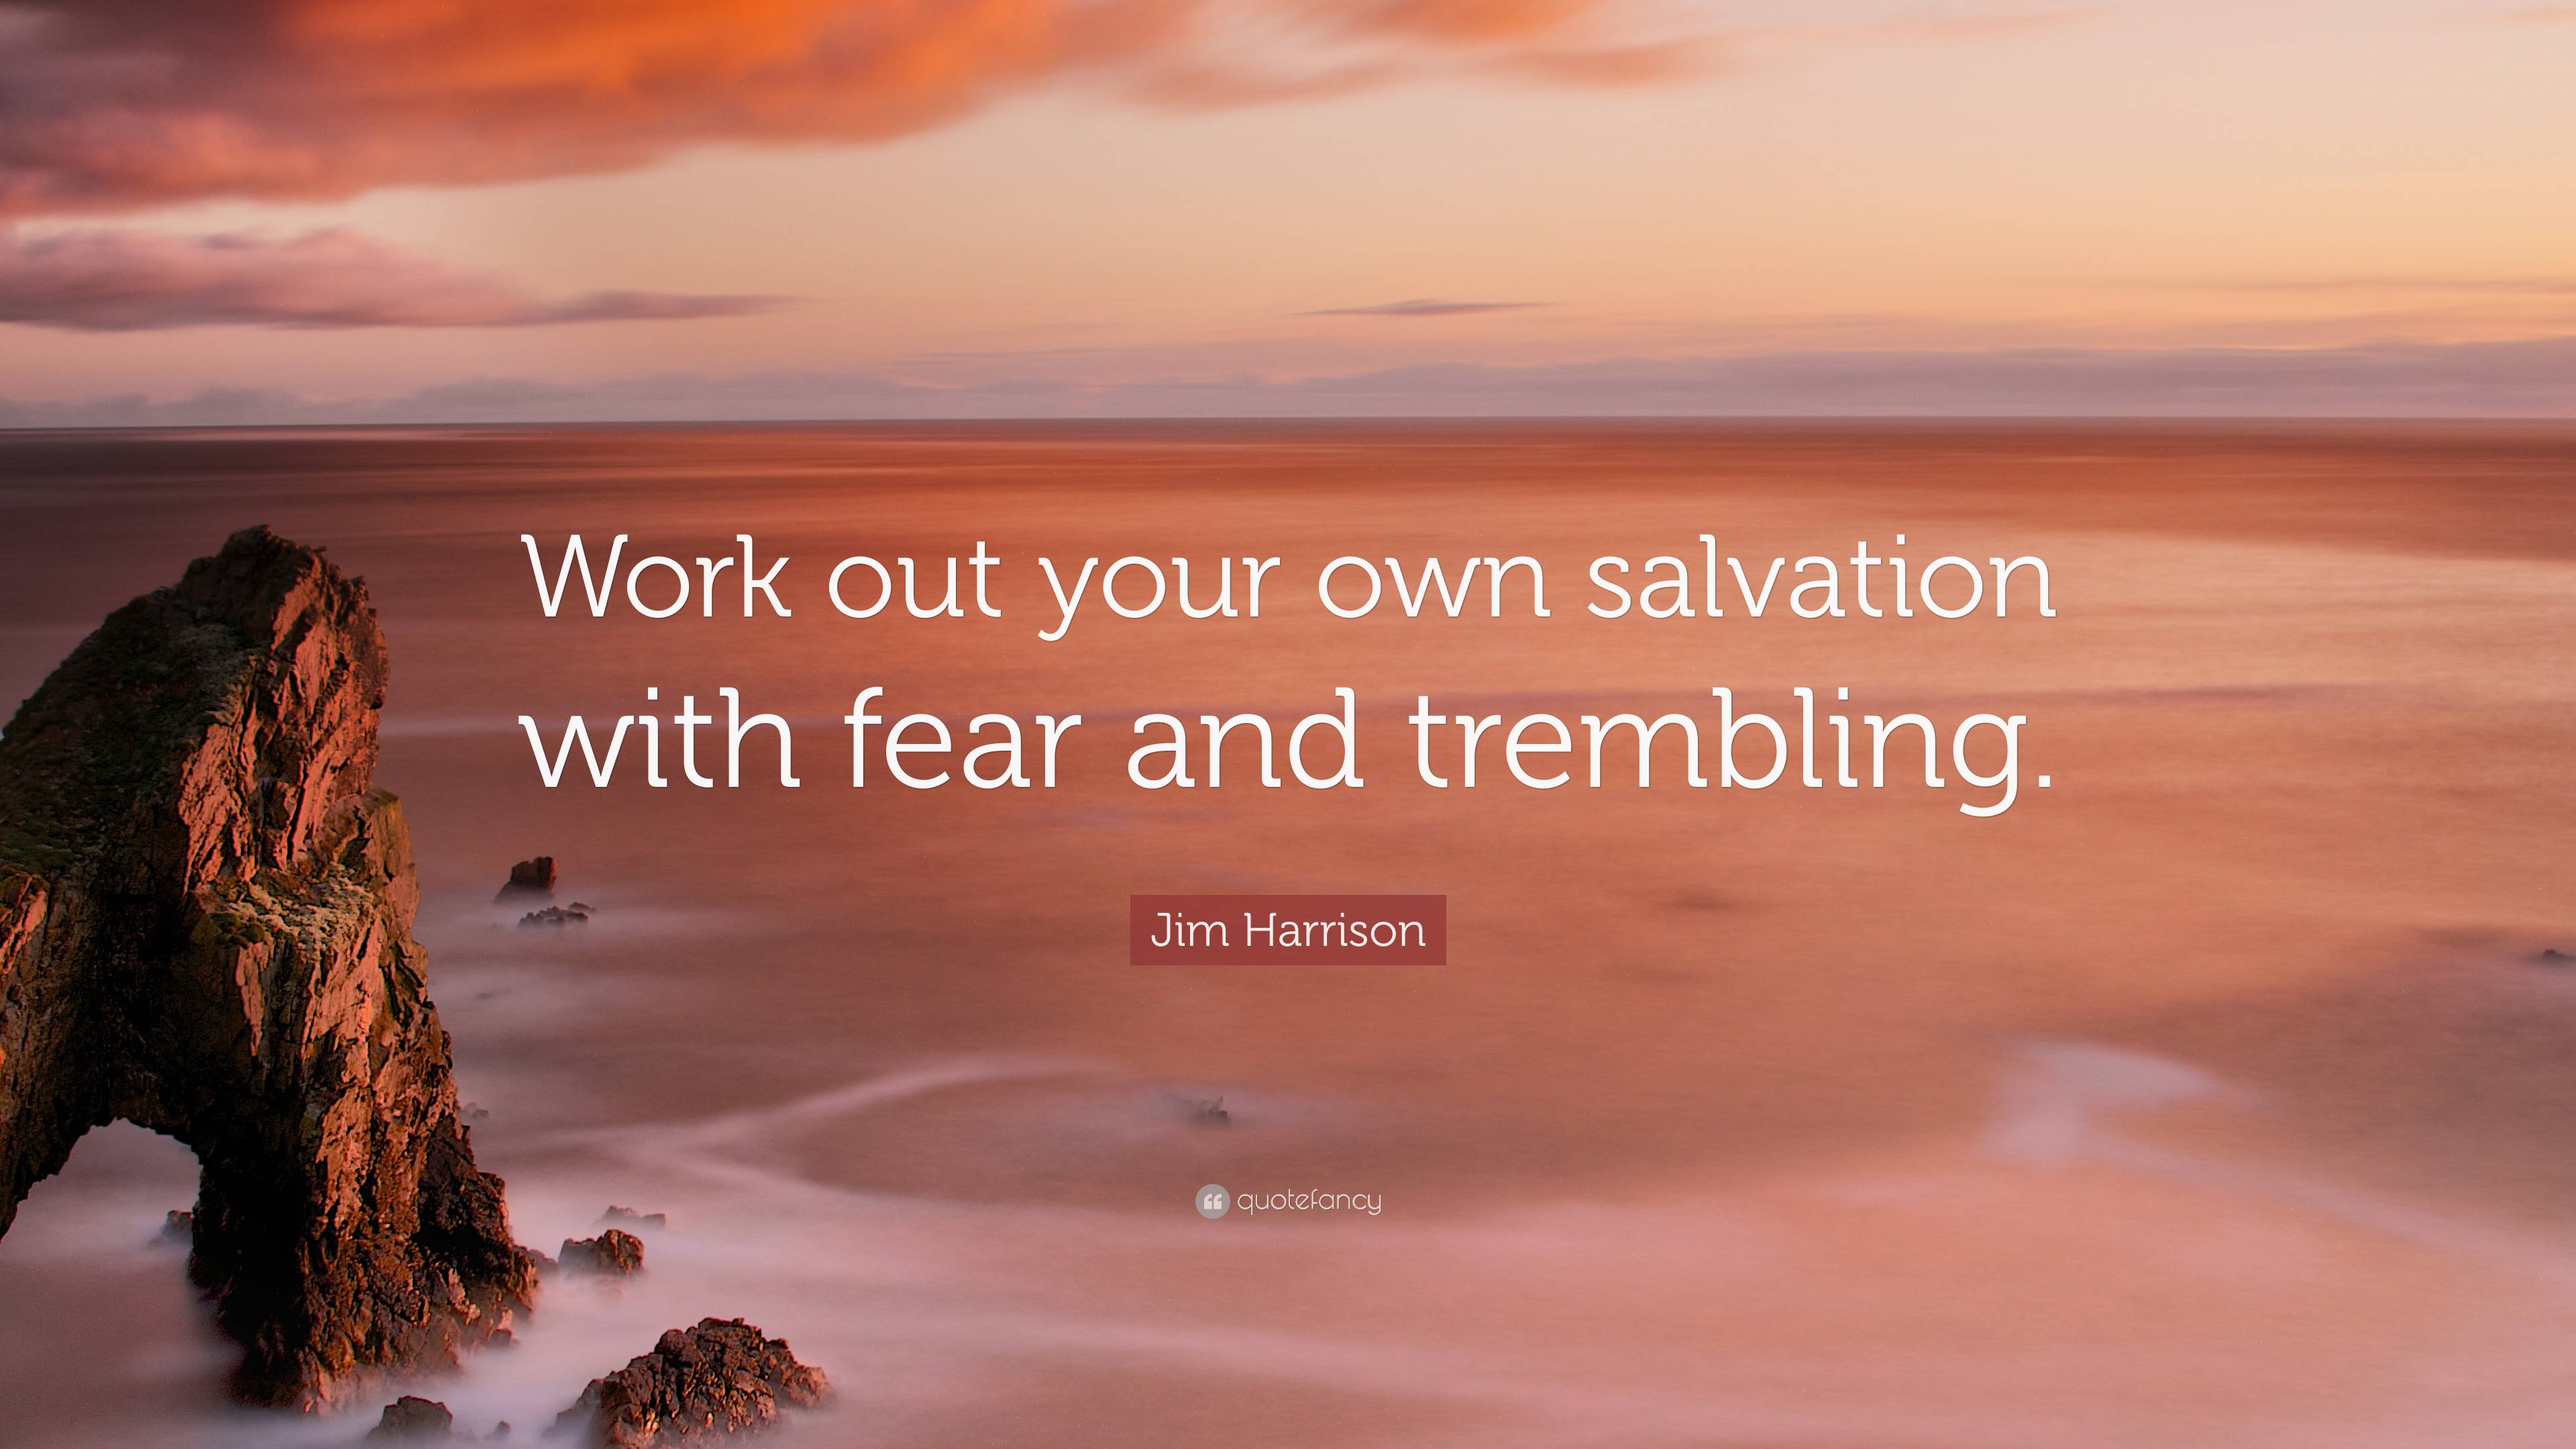 What does it mean to “work out your salvation with fear and